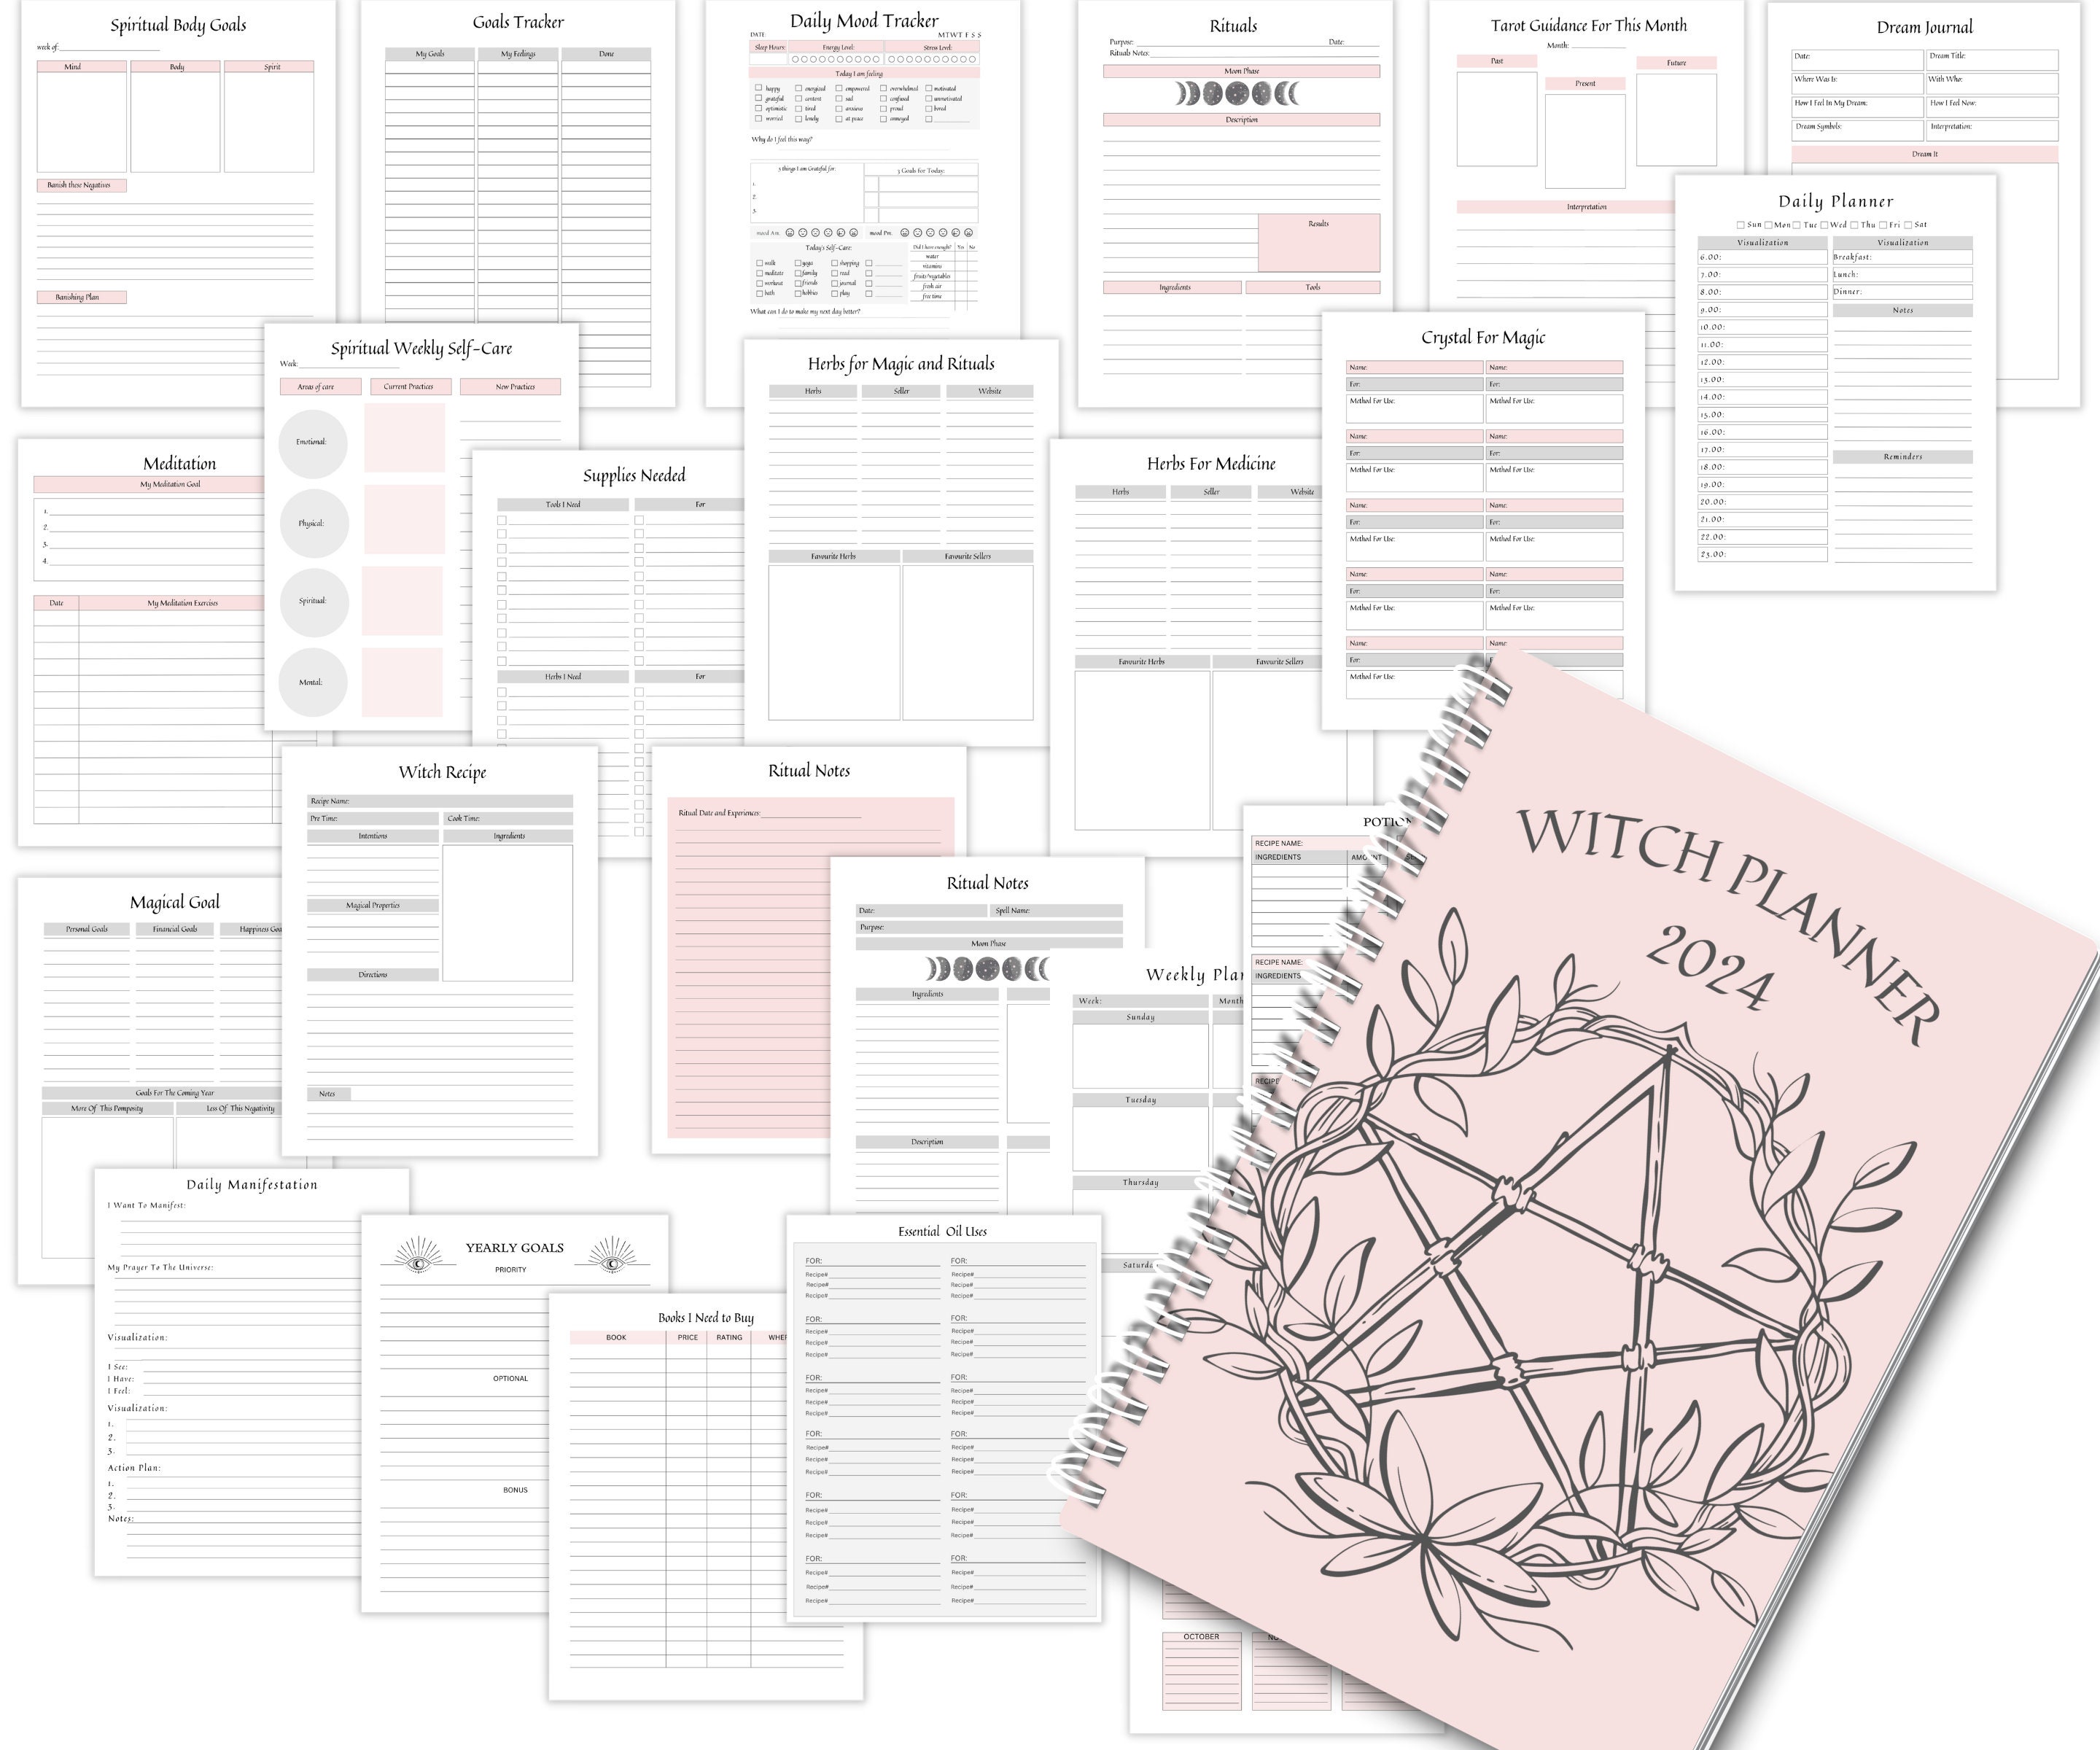 Witches Datebook 2024: With Sabbats, Tarot, rune casting, spells,  meditations, Moon Phases, Astrology Tides And More! This Diary Makes a  Great Witchy